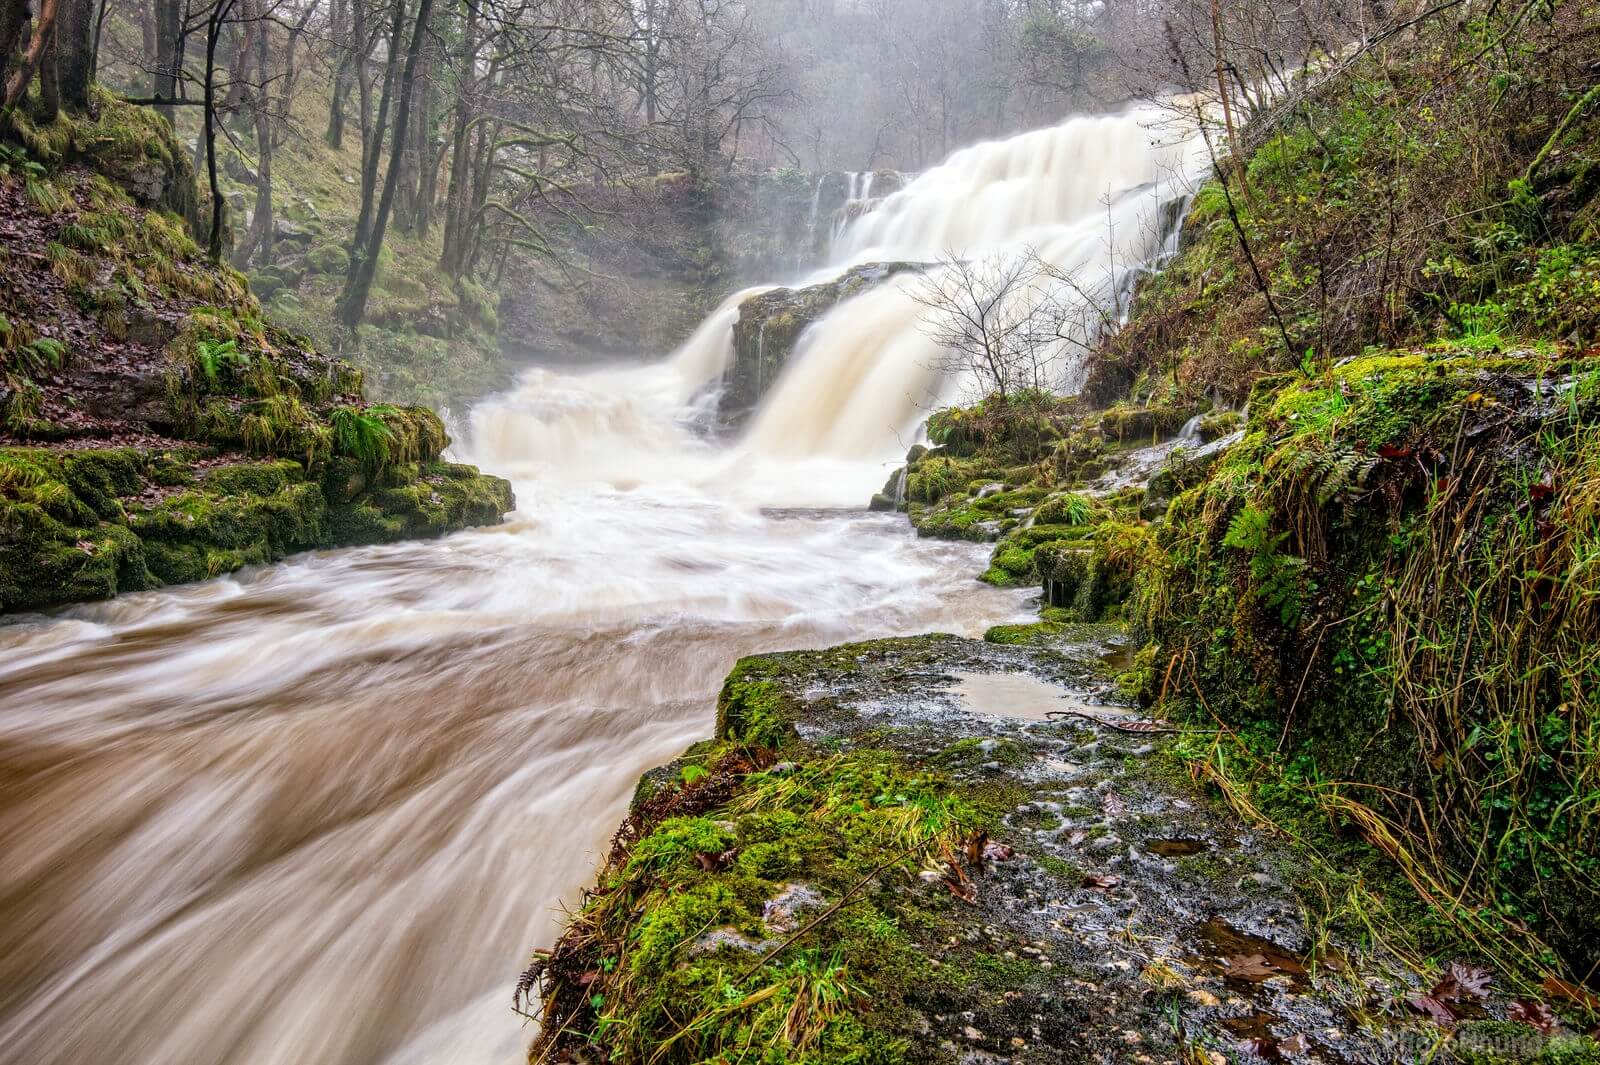 Image of Four Falls by Richard Lizzimore